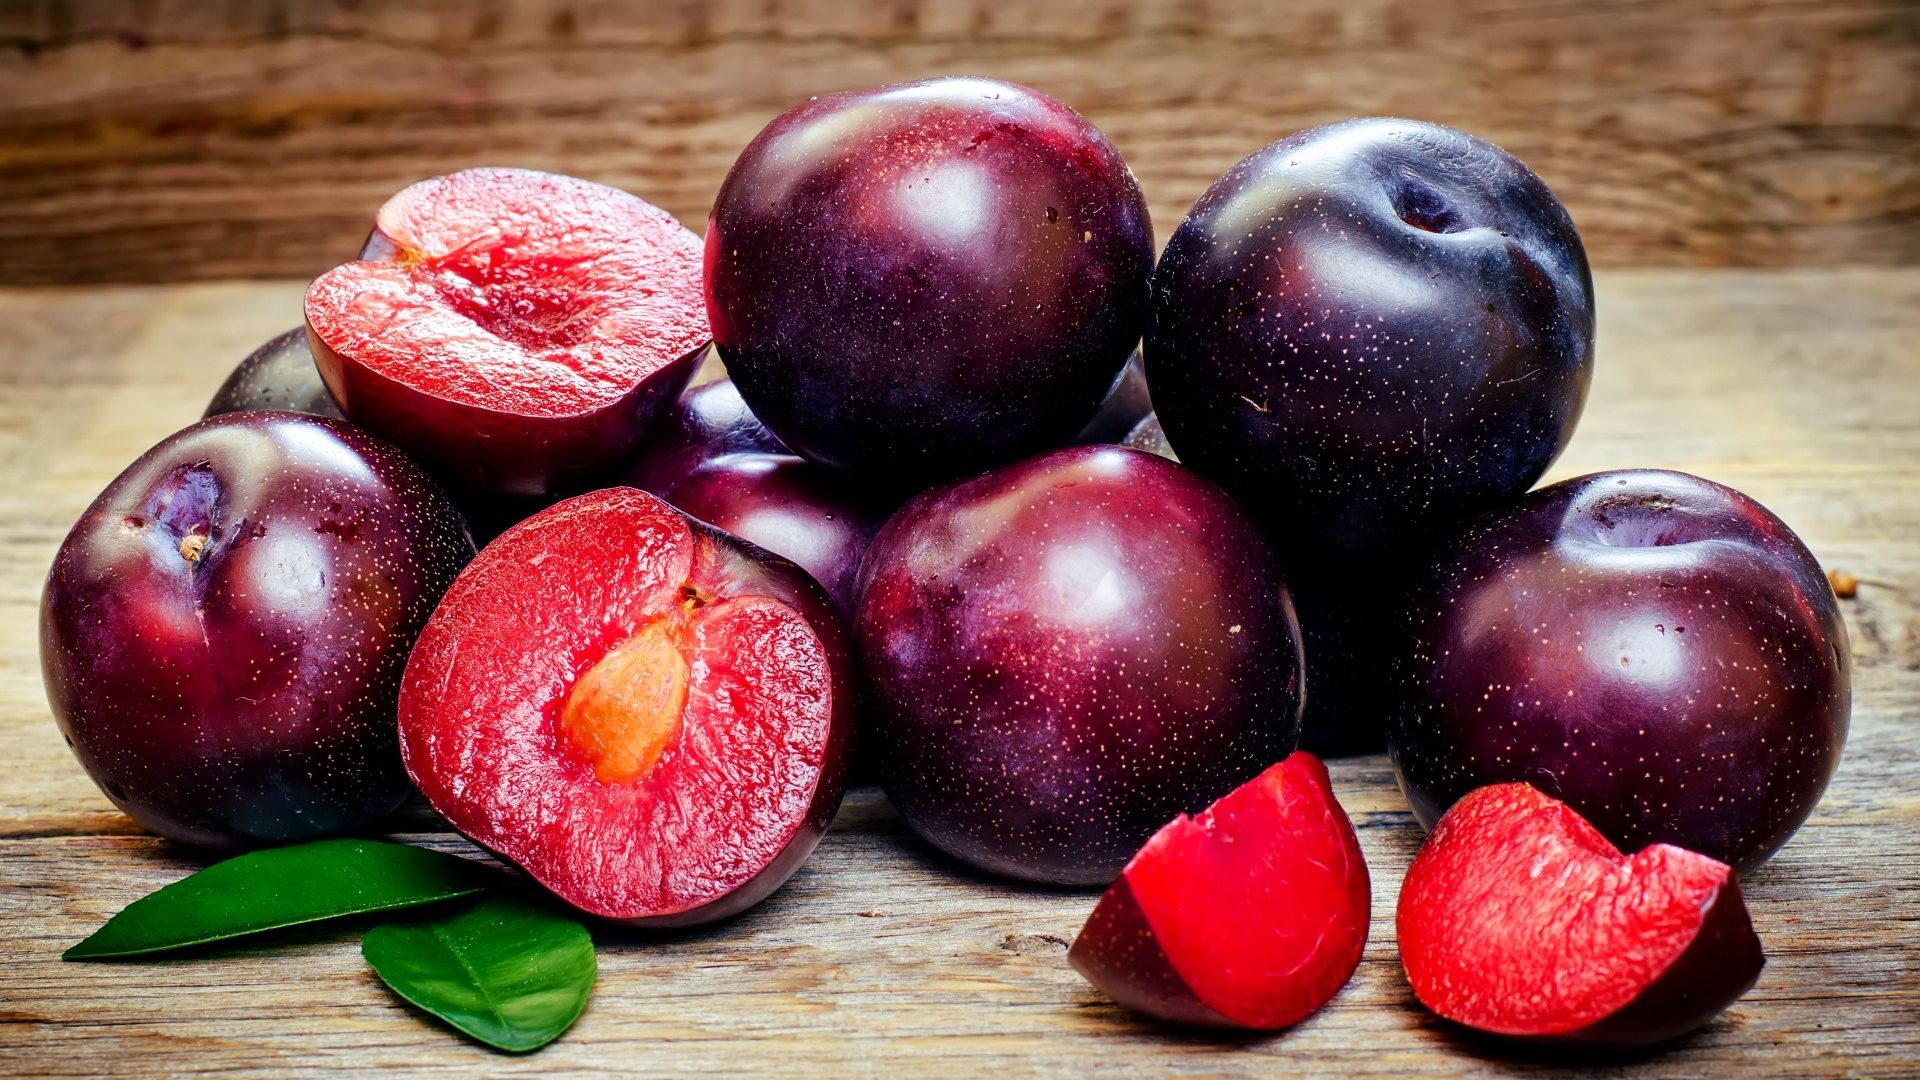 Plum Fruits HD Wallpaper This Is Just To Say